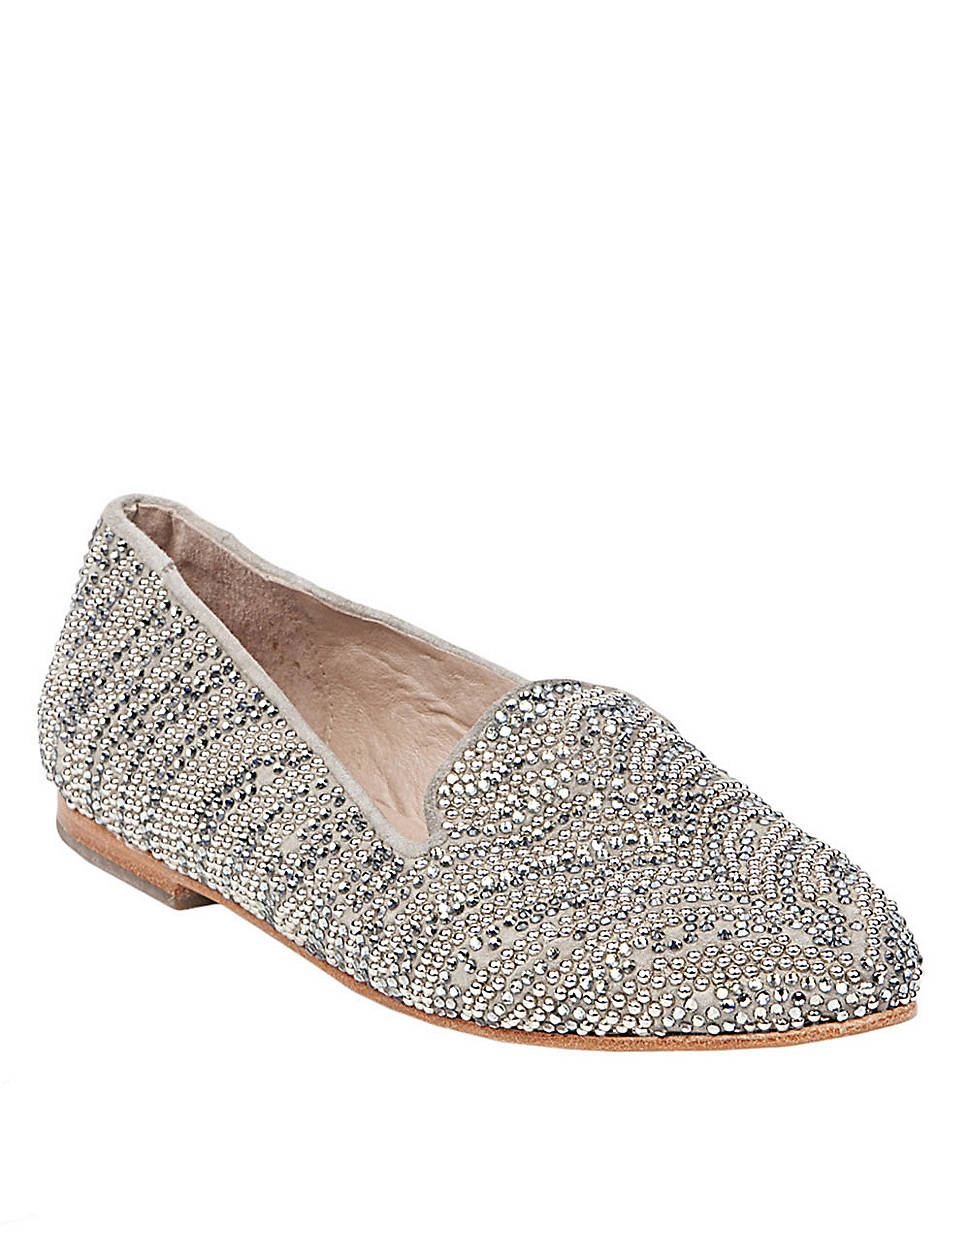 Steve Madden Conncord Beaded Flats in Silver (pewter metallic) | Lyst